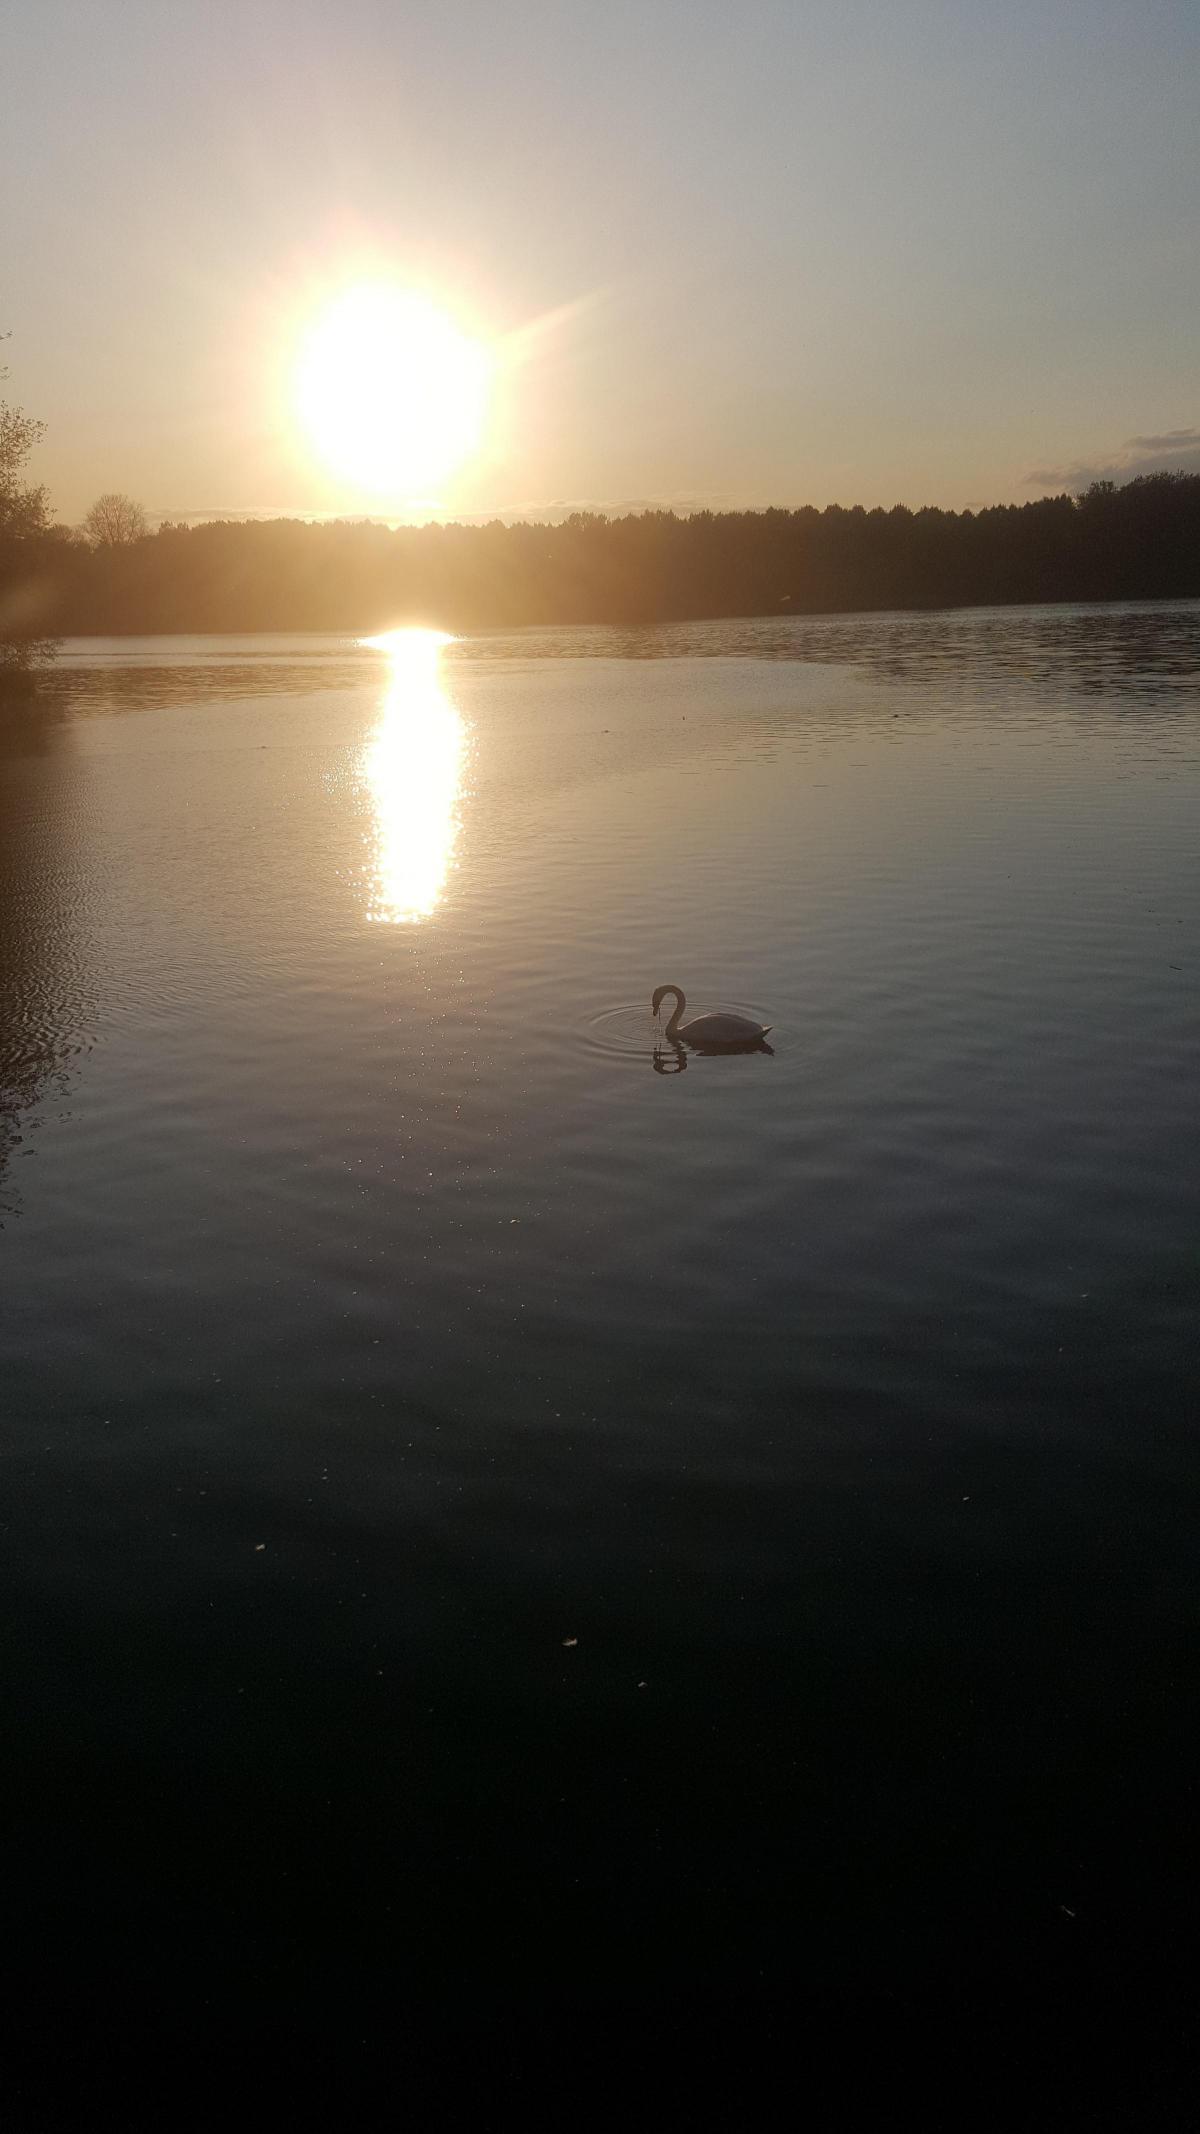 Swan on the lake                                                                       Picture: AMY HILLIER